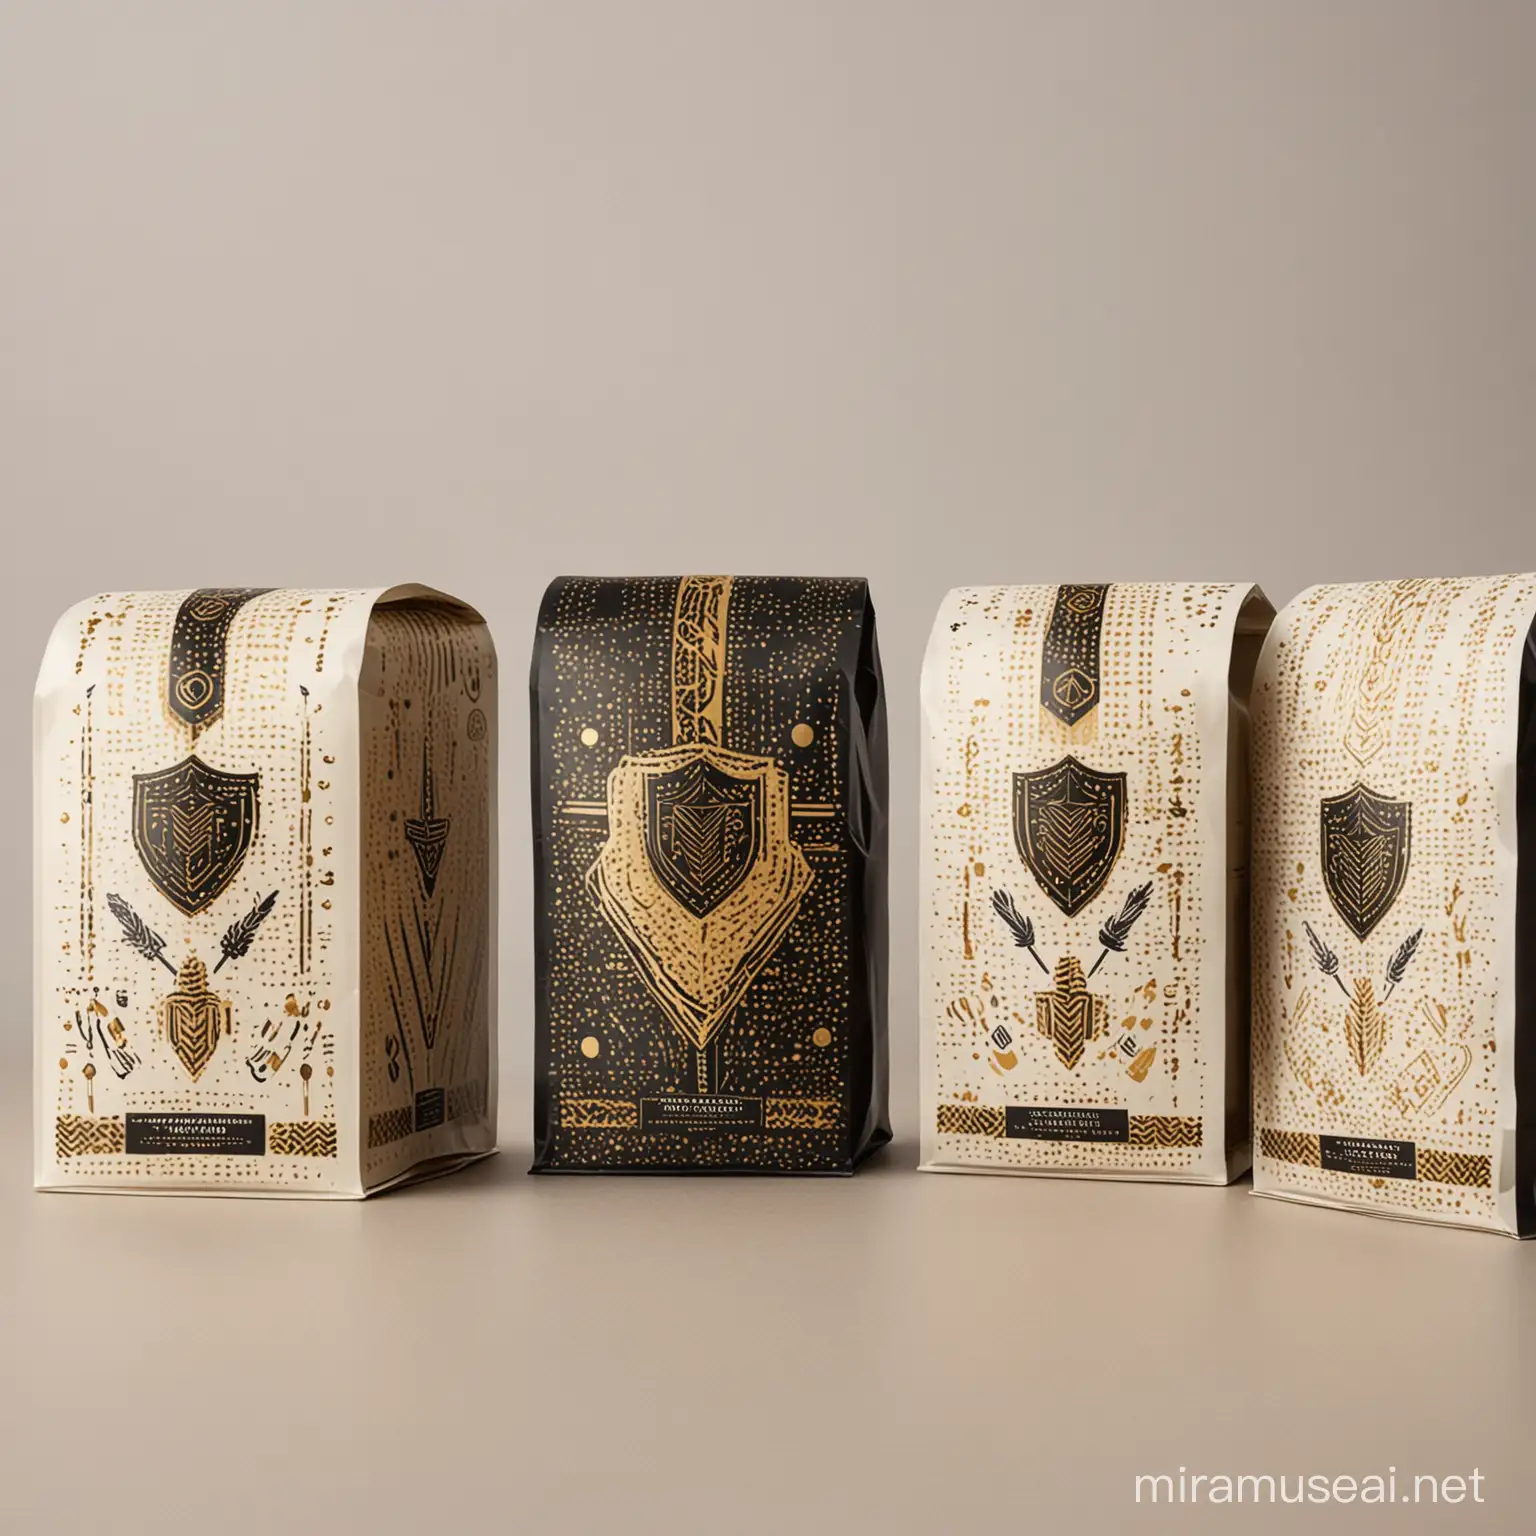 Elegant Coffee Packaging in Black and Gold with African Print Design